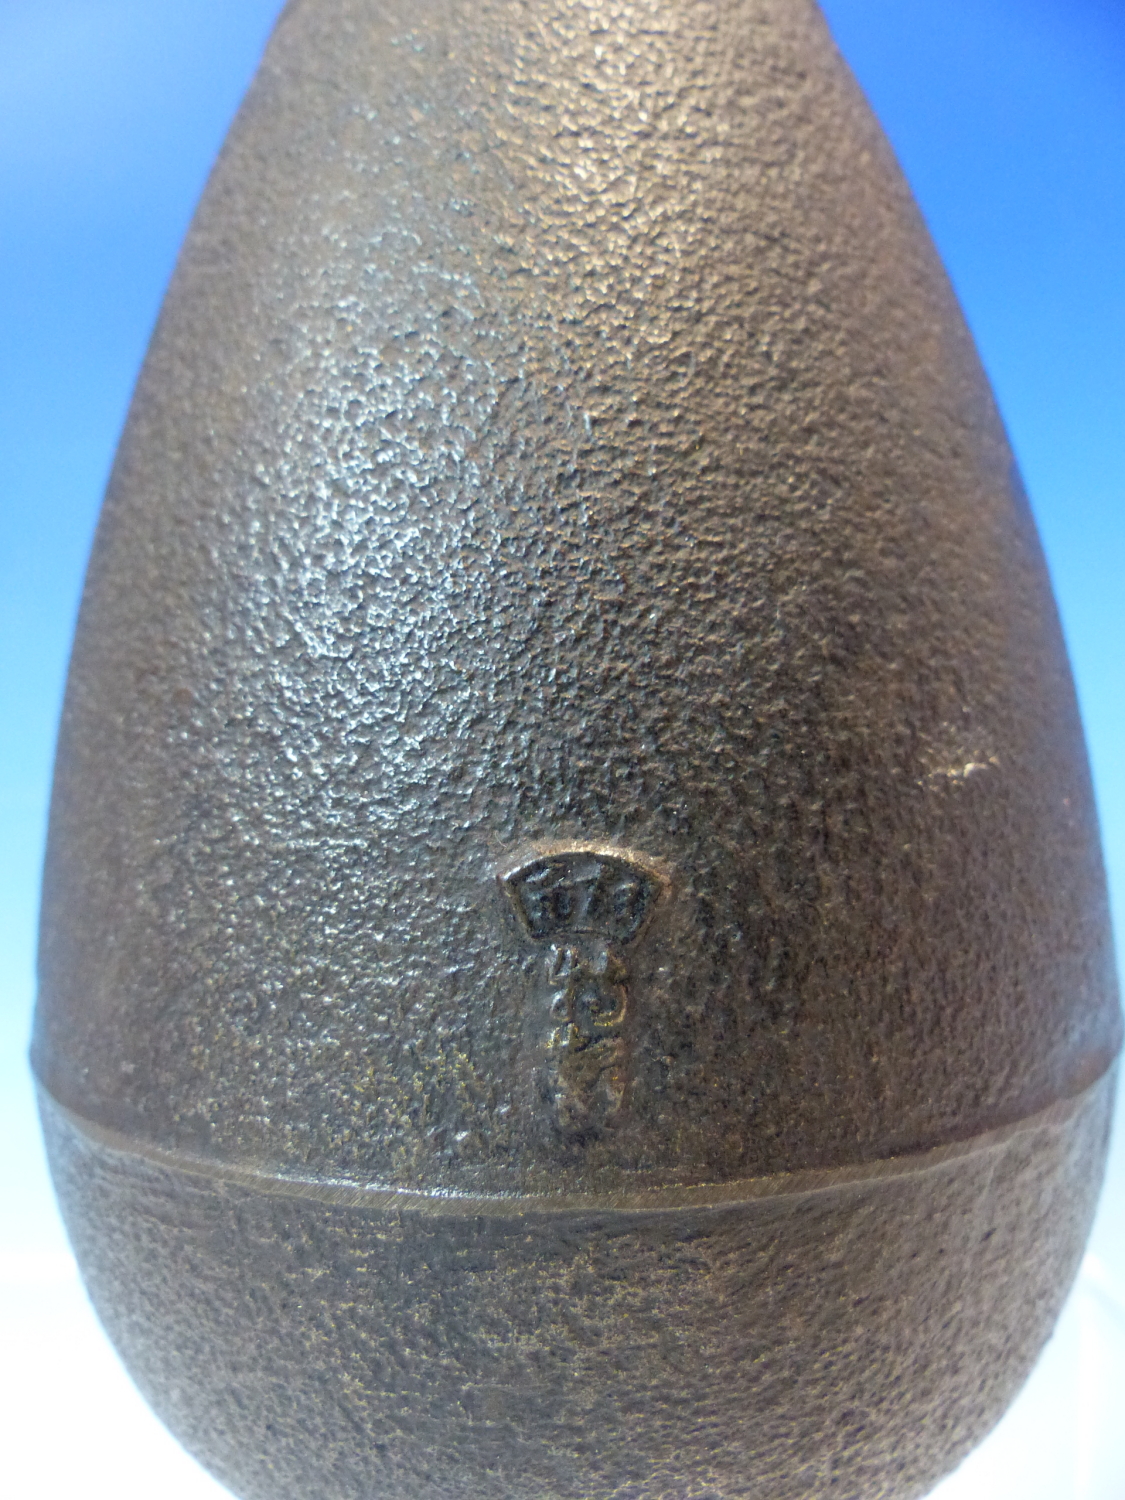 A JAPANESE CAST IRON VASE OF OVOID FORM WITH SCRIPT DECORATION AND SIGNITURE SEAL. 13CM HIGH - Image 8 of 9